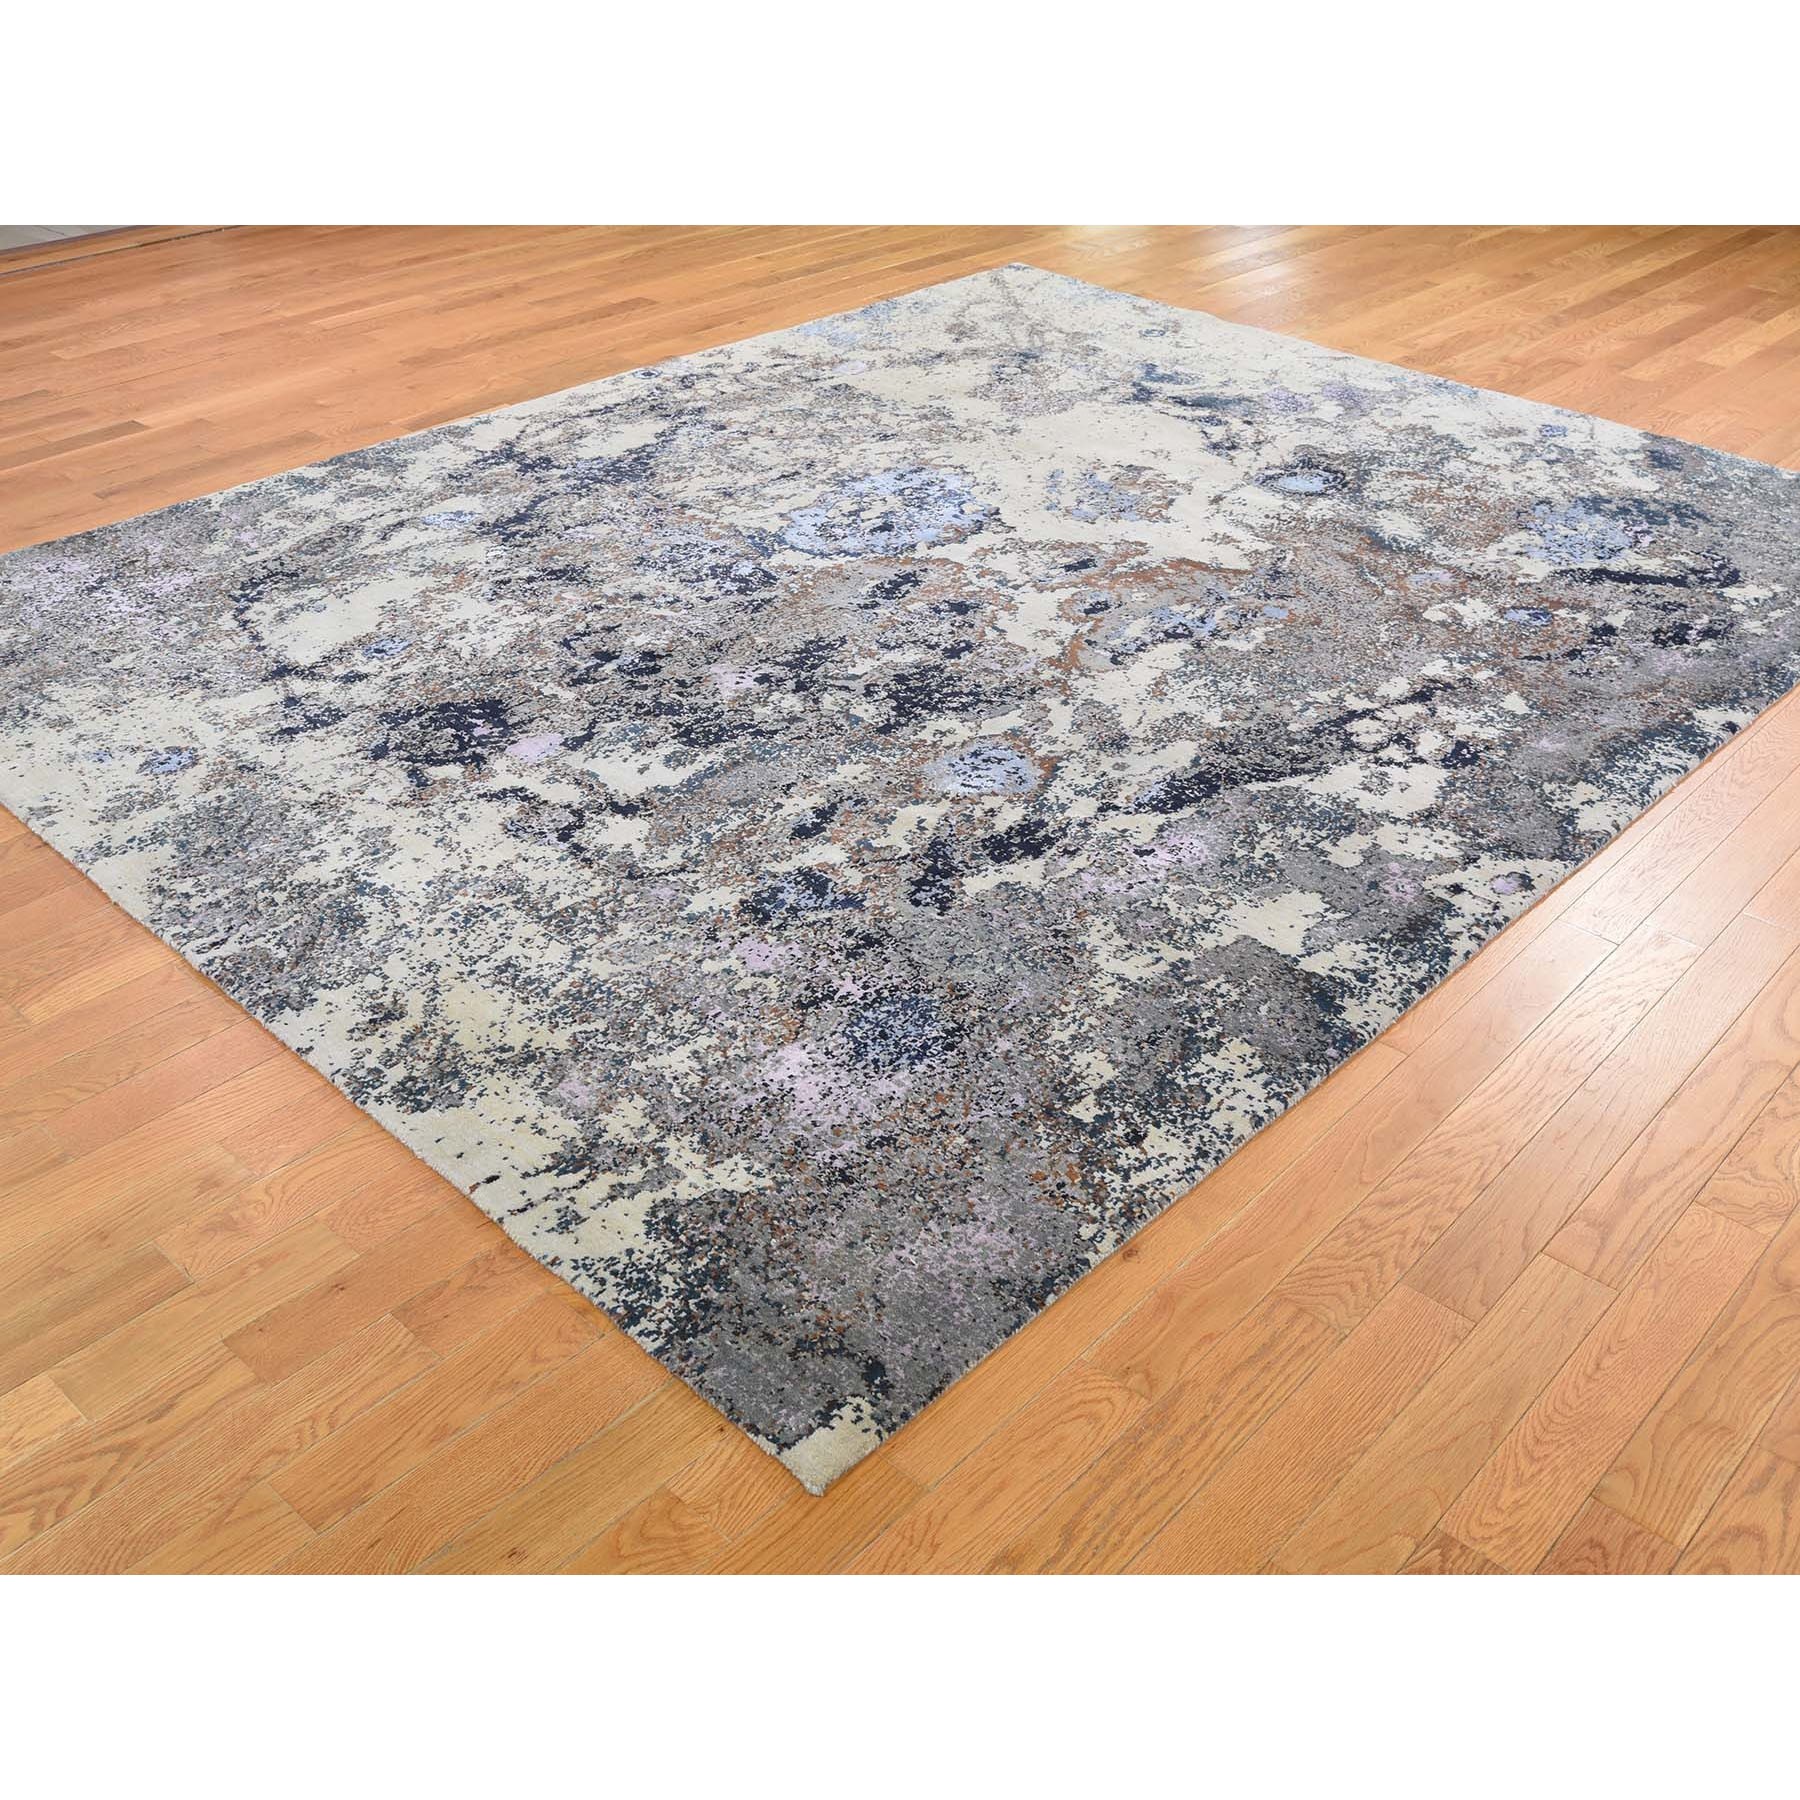 8-x10- Abstract Design Wool and Silk Hand-Knotted Oriental Rug 